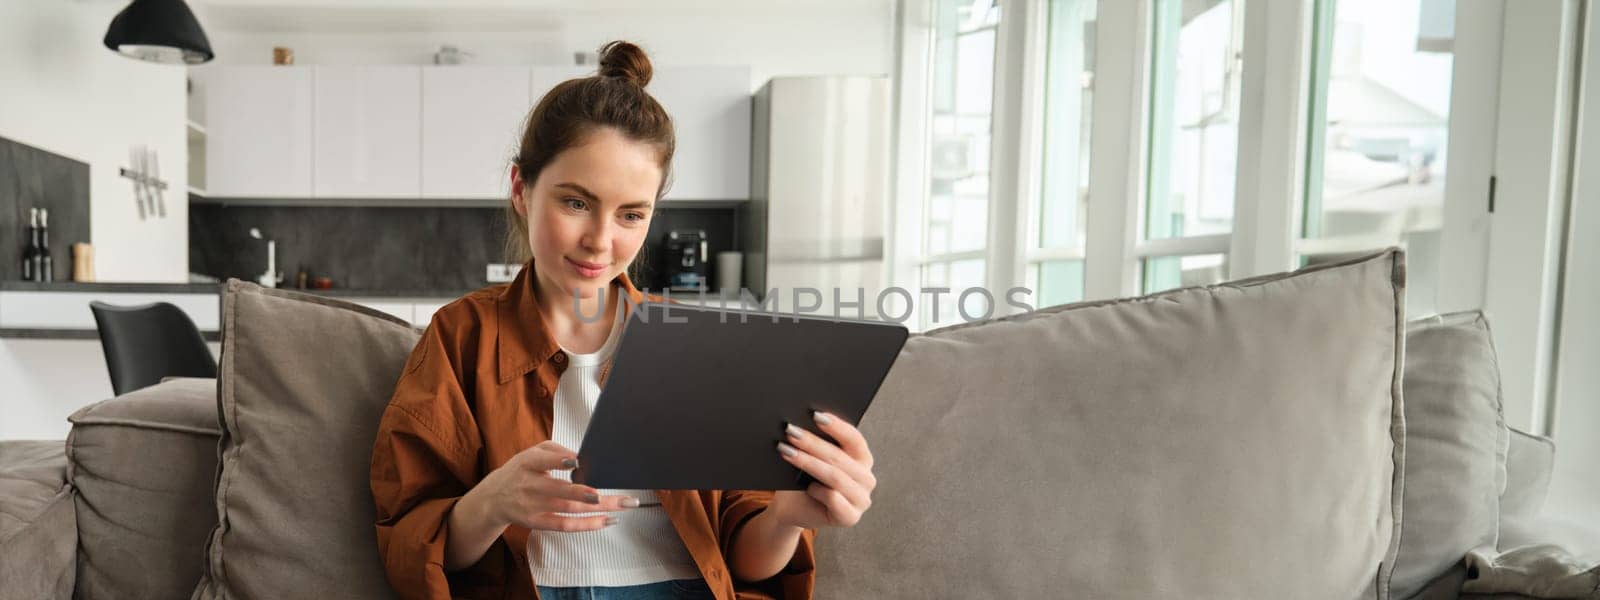 Portrait of smiling beautiful woman, sitting on couch, watching videos on digital tablet, reading e-book on her device, resting at home.